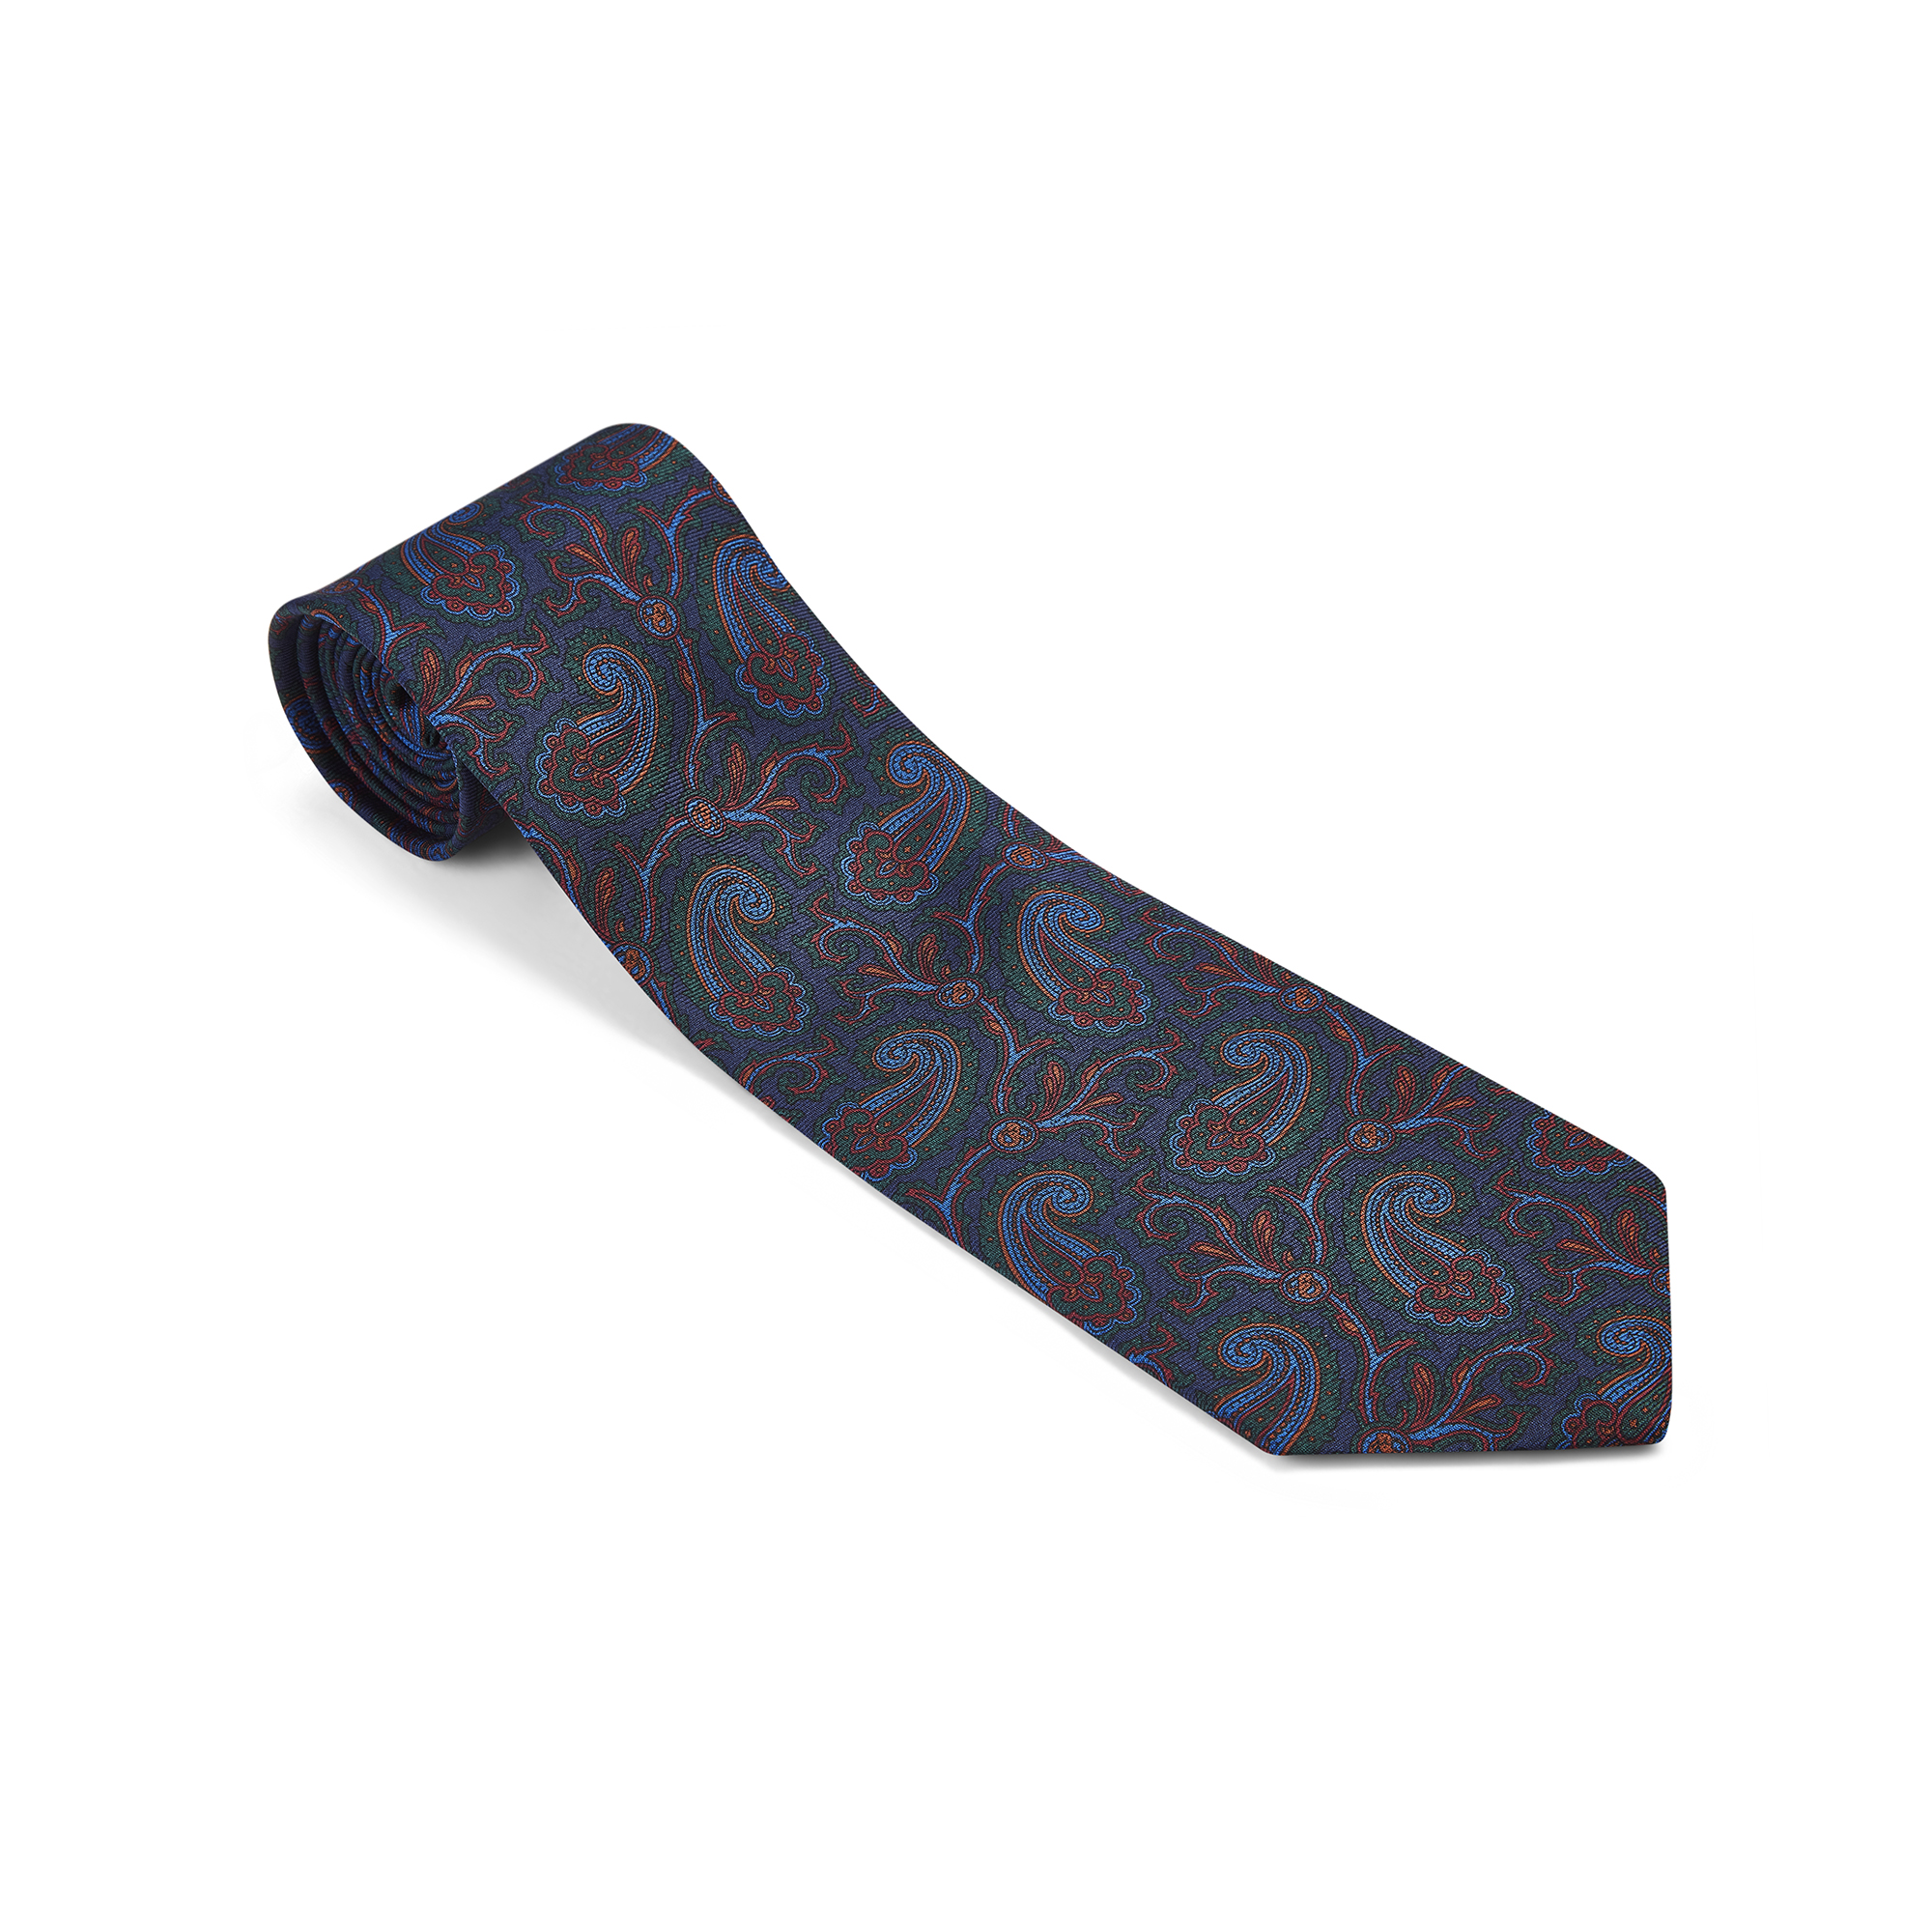 Madder Silk Tie, Navy Blue With Red, Green & Blue Paisley